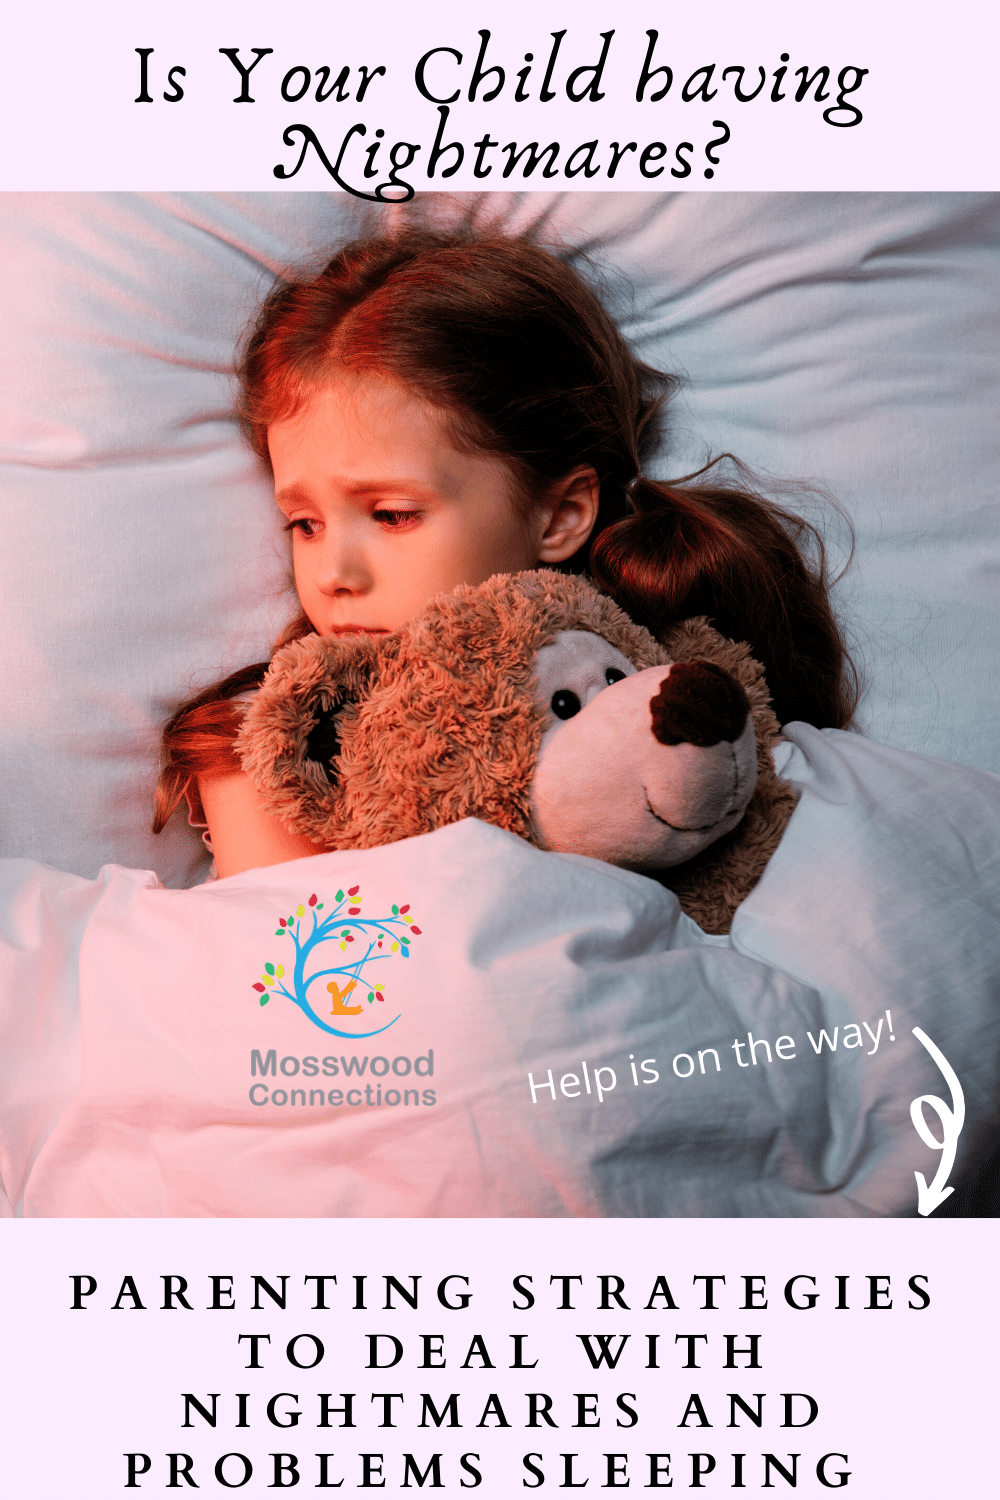 Parenting strategies to deal with nightmares and problems sleeping  #mosswoodconnections #childdevelopment #parenting #nightmares